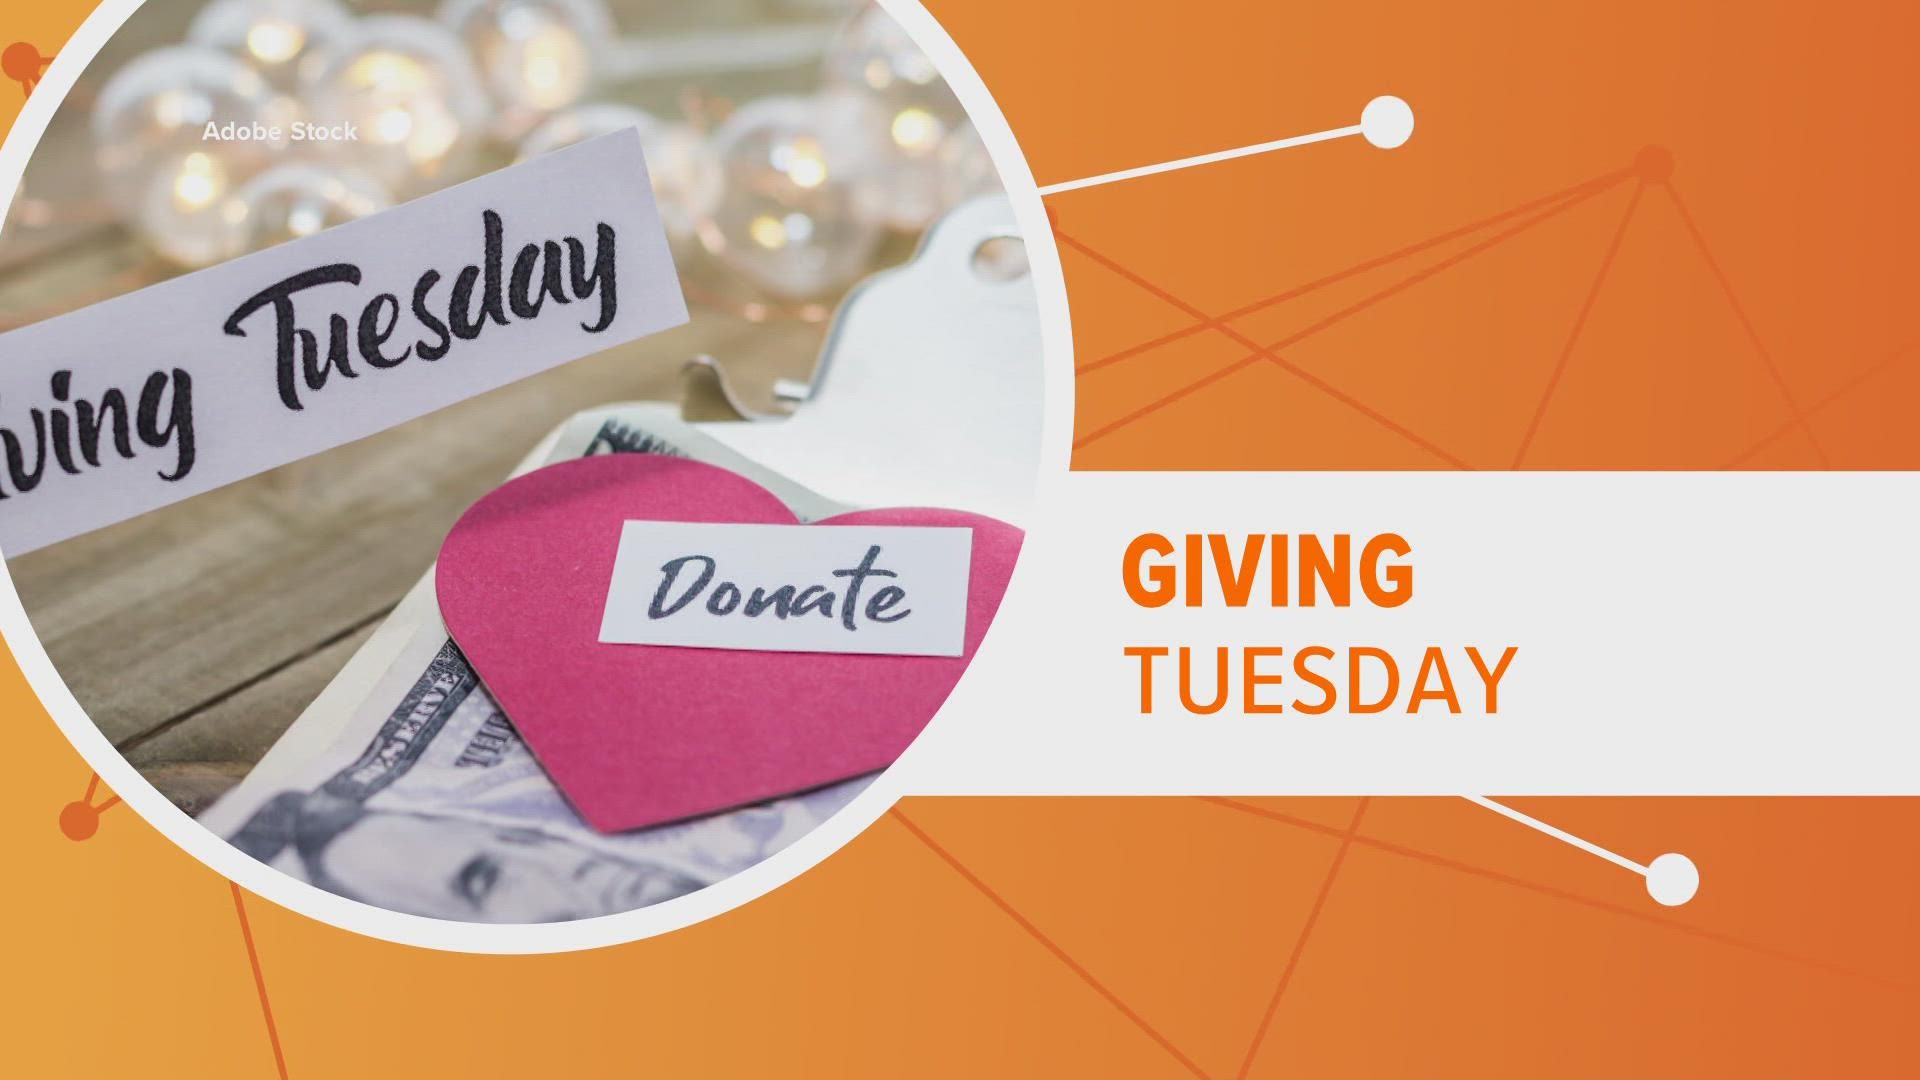 While Cyber Monday is always a big shopping holiday, you could make a big difference is you saved some of that cash for Giving Tuesday.